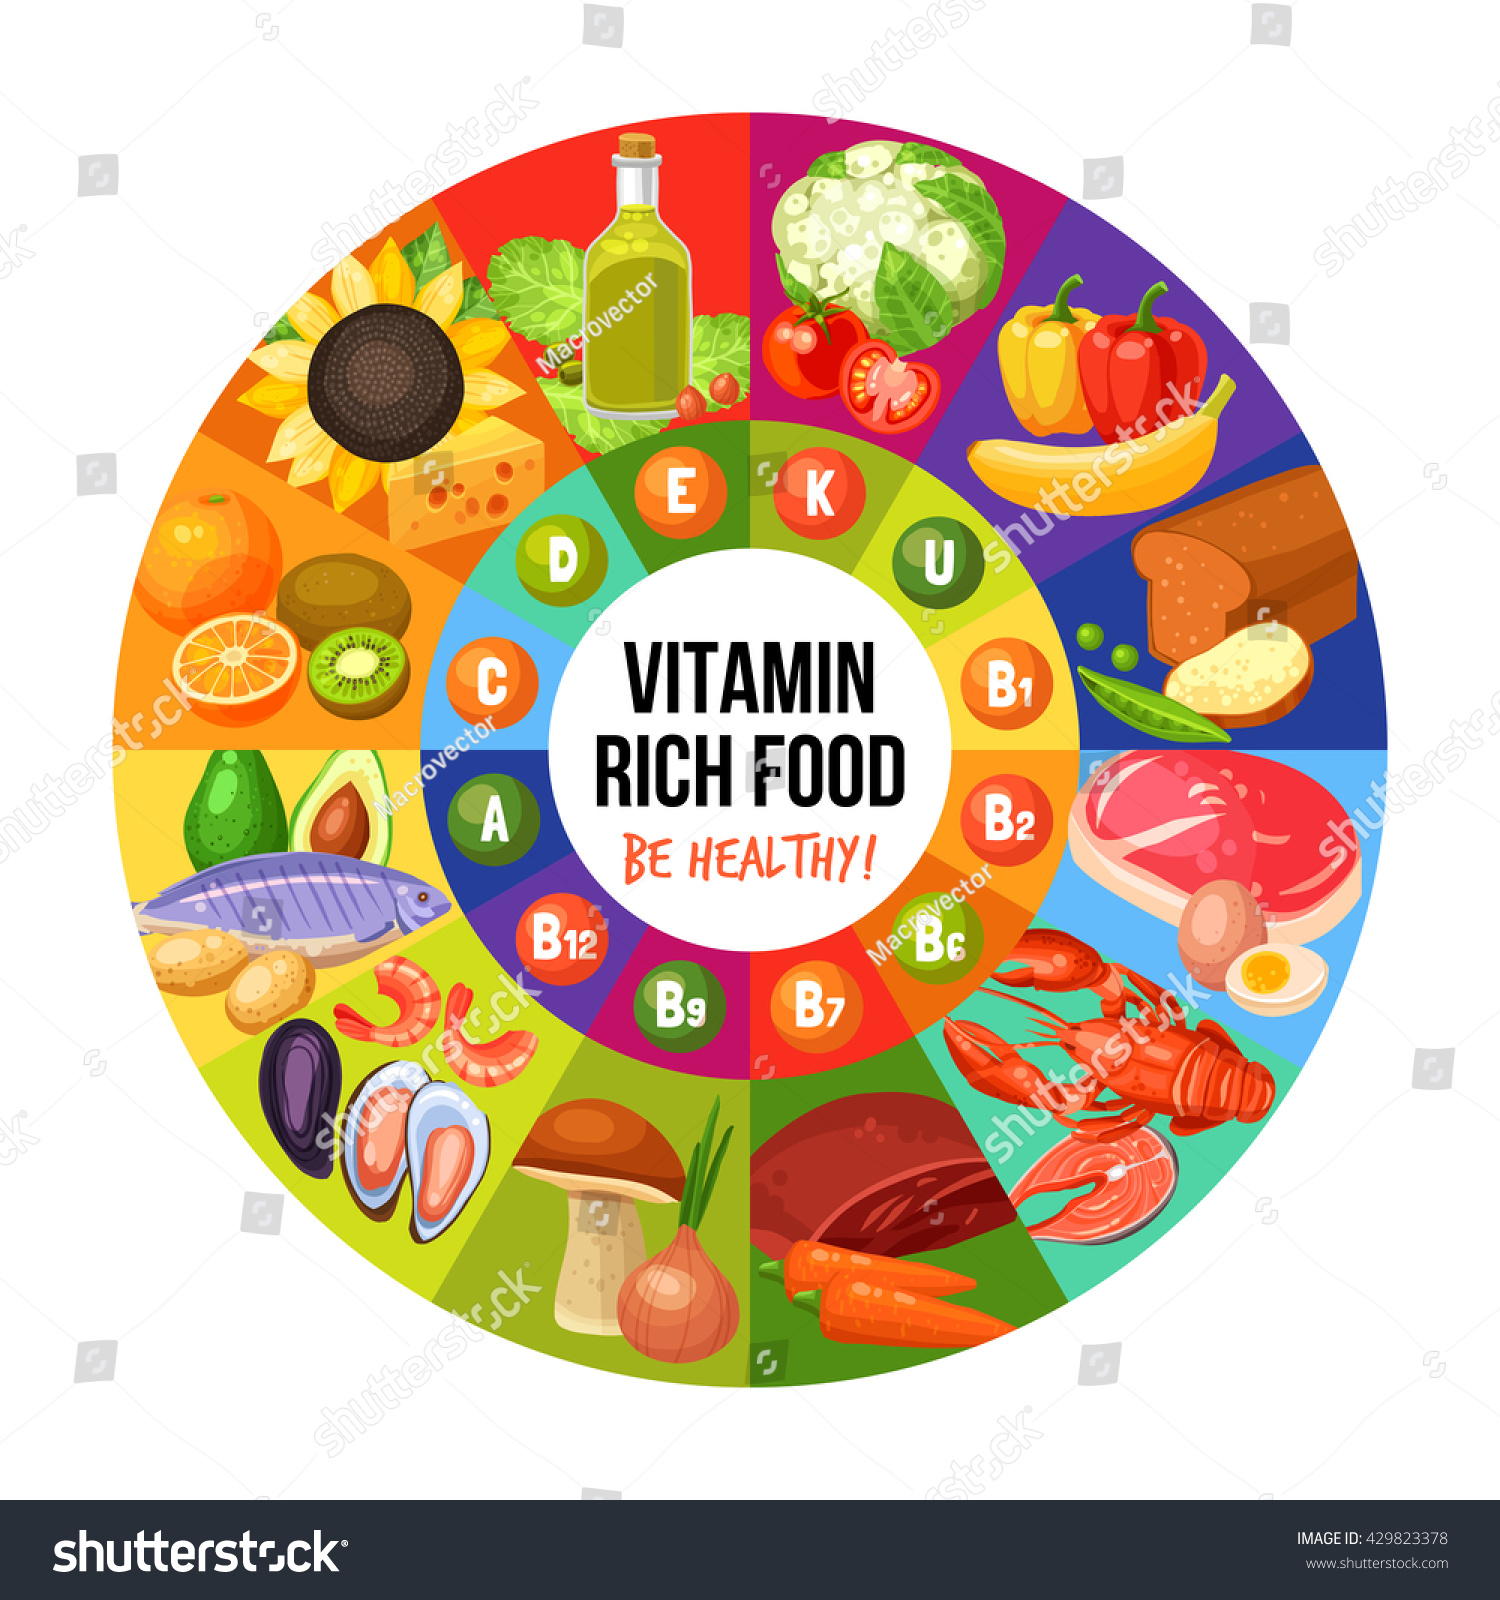 Circle Title Centre Vitamin Groups Middle Stock Vector (Royalty Free ...